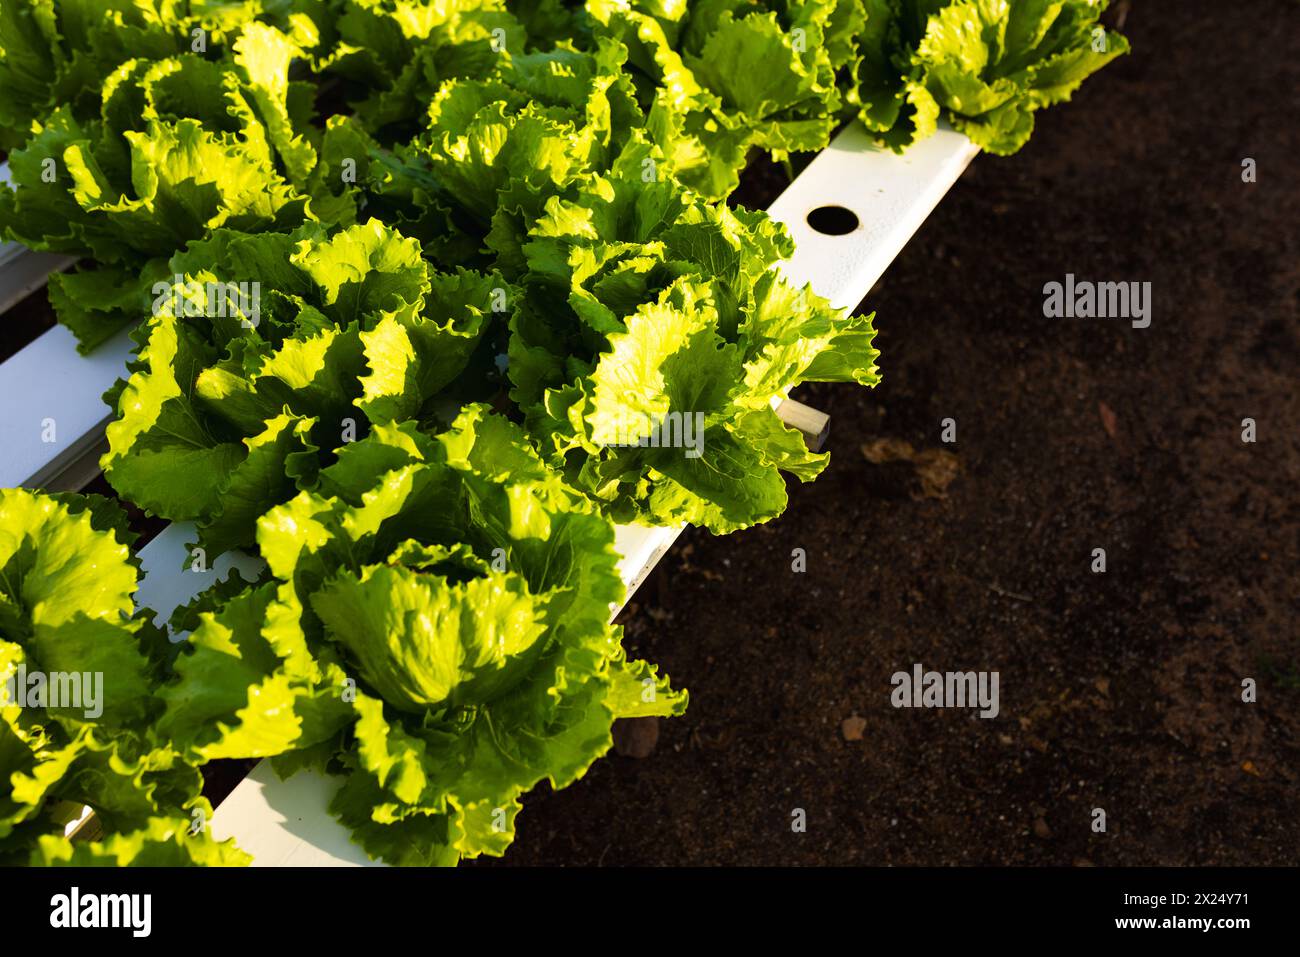 Rows of bright green lettuce growing in white hydroponic channels in a hydroponic greenhouse Stock Photo